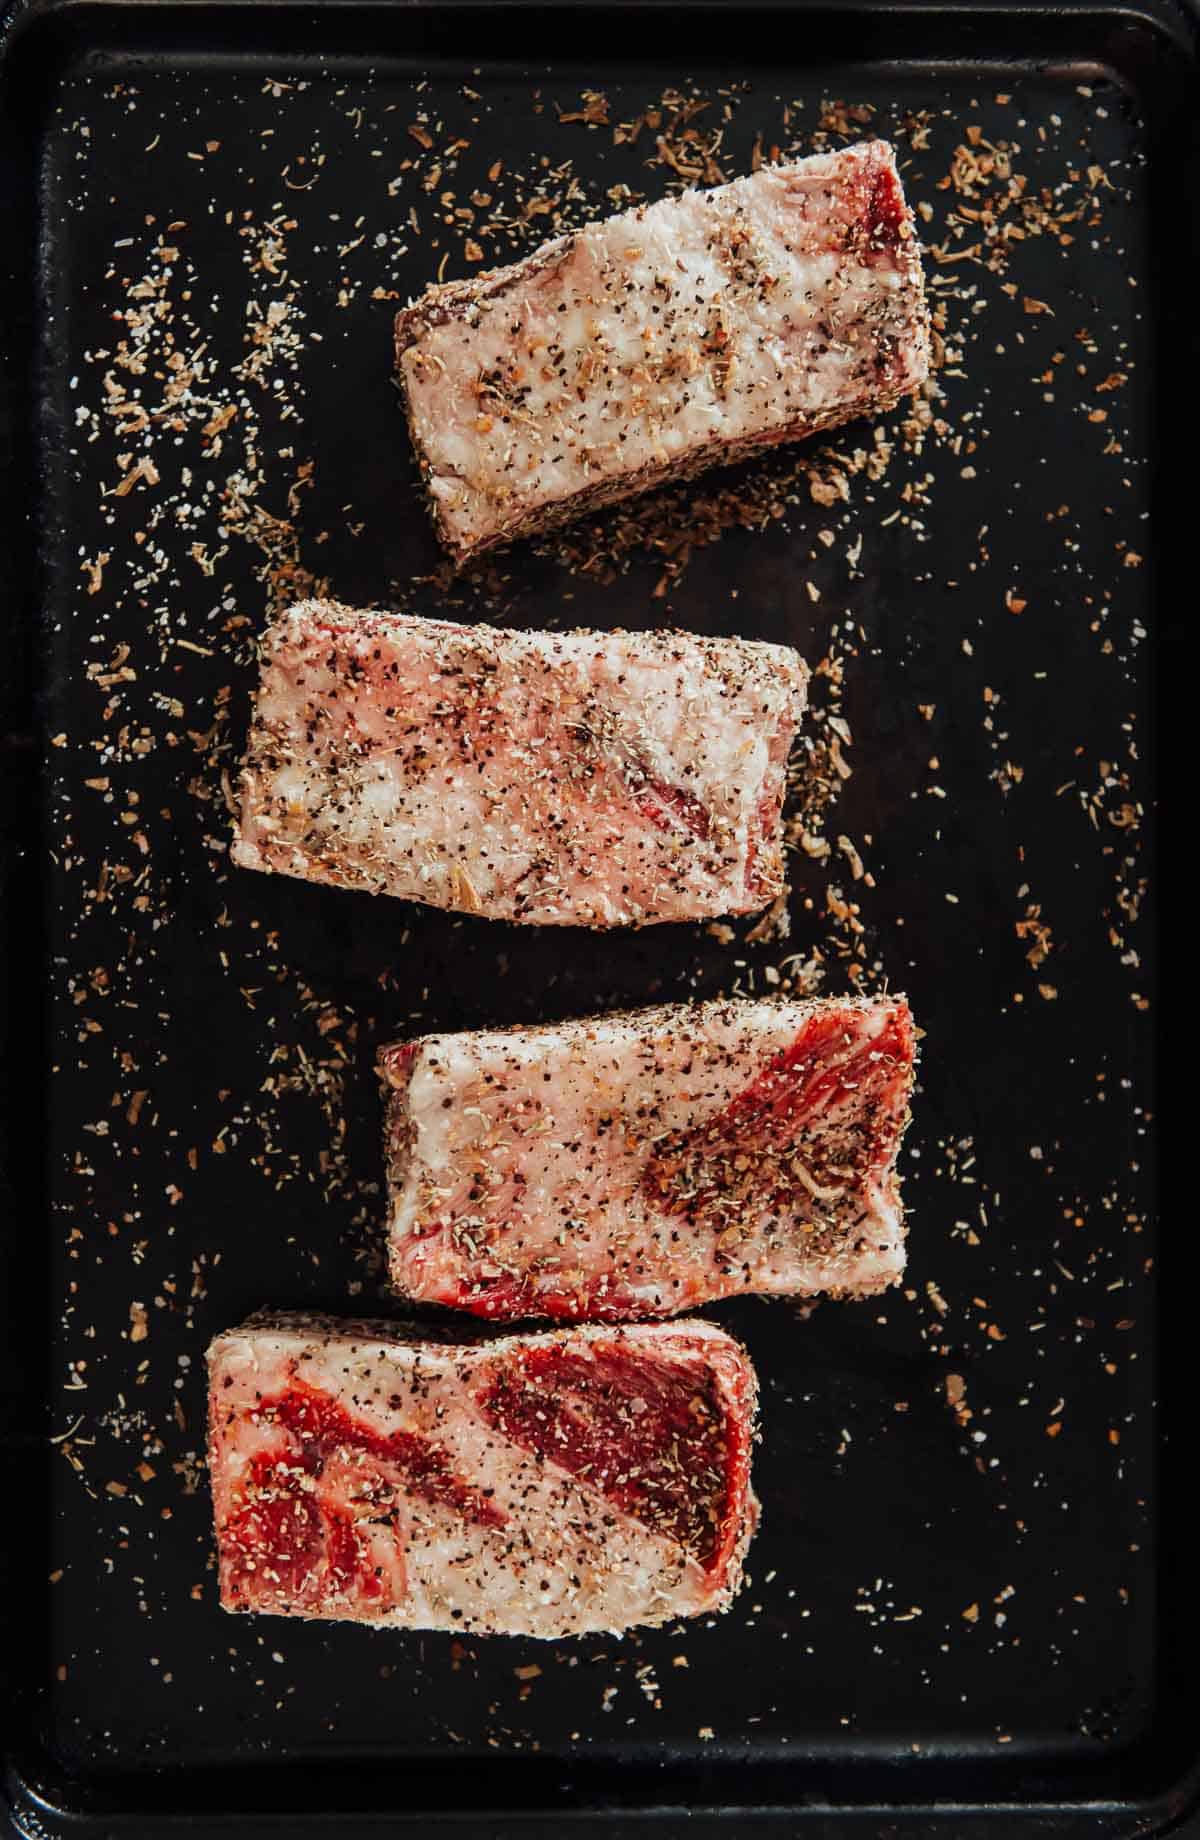 Beef ribs being seasoned on a black tray.